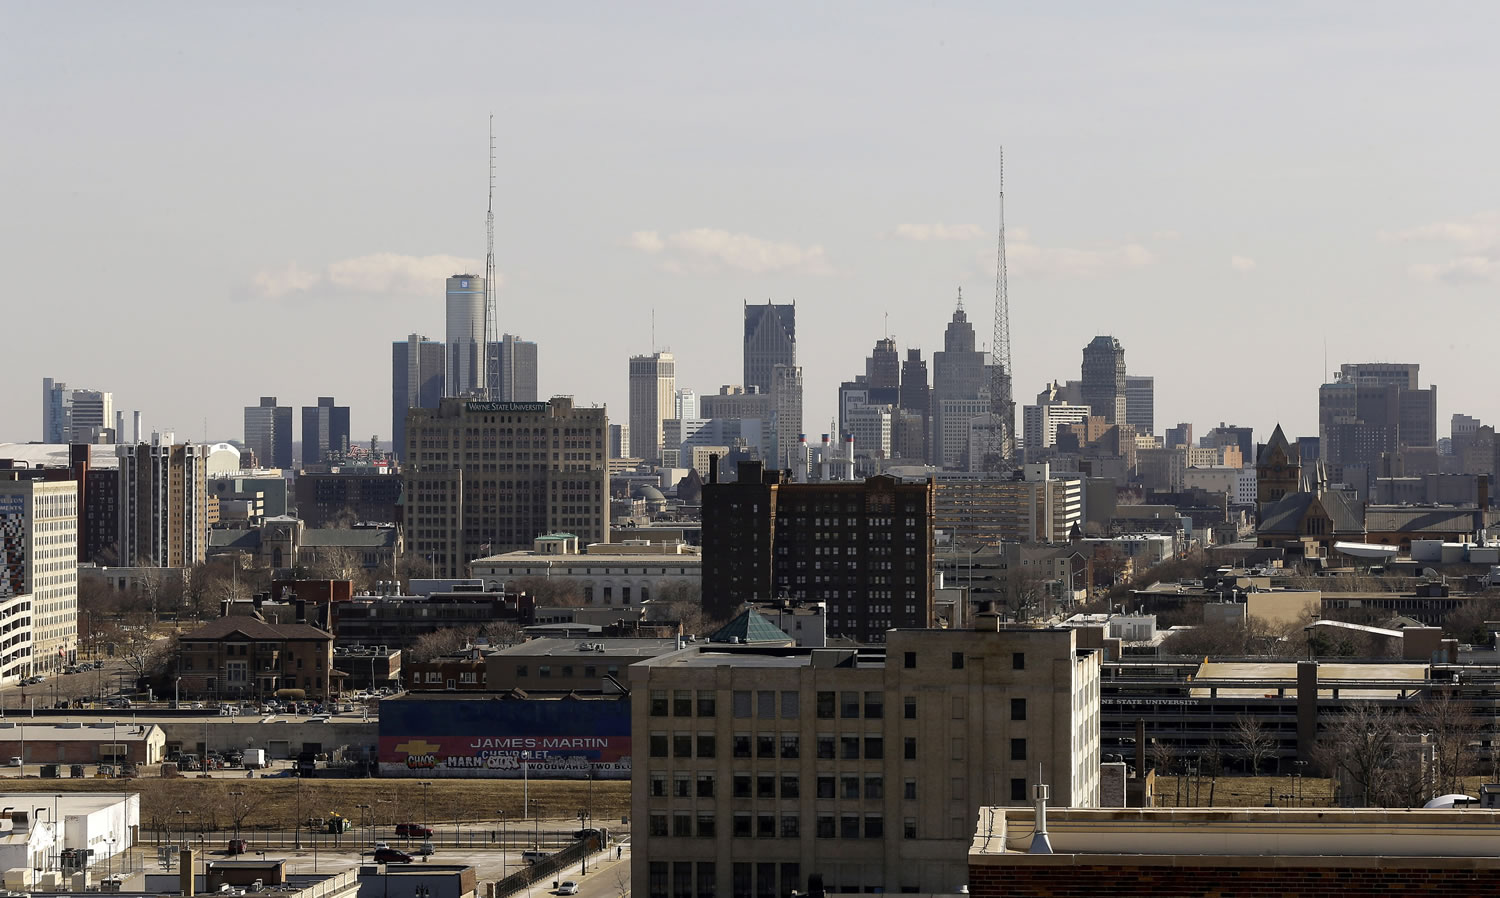 The skyline of the city of Detroit. In a report released late Sunday, Kevyn Orr, the city's state-appointed emergency manager, said Detroit is broke and faces a bleak future given the precarious financial path it's on.